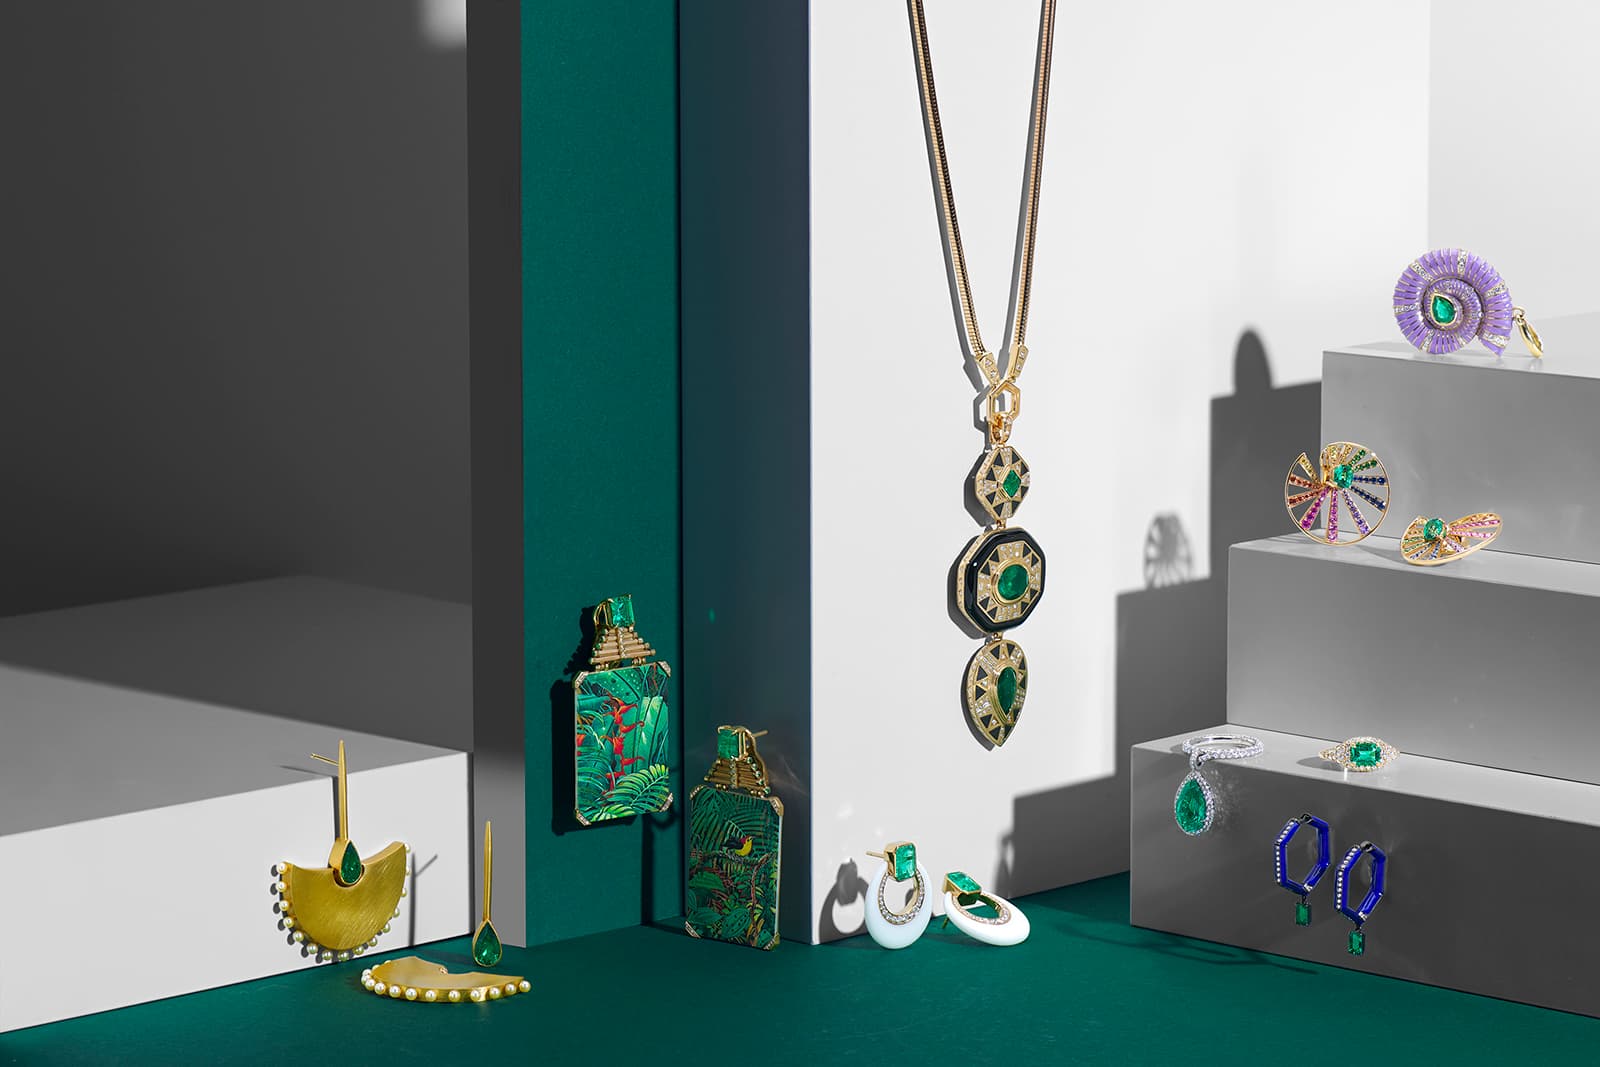 Muzo emerald jewellery creations by the 10 female-led jewellery brands chosen for this collaboration